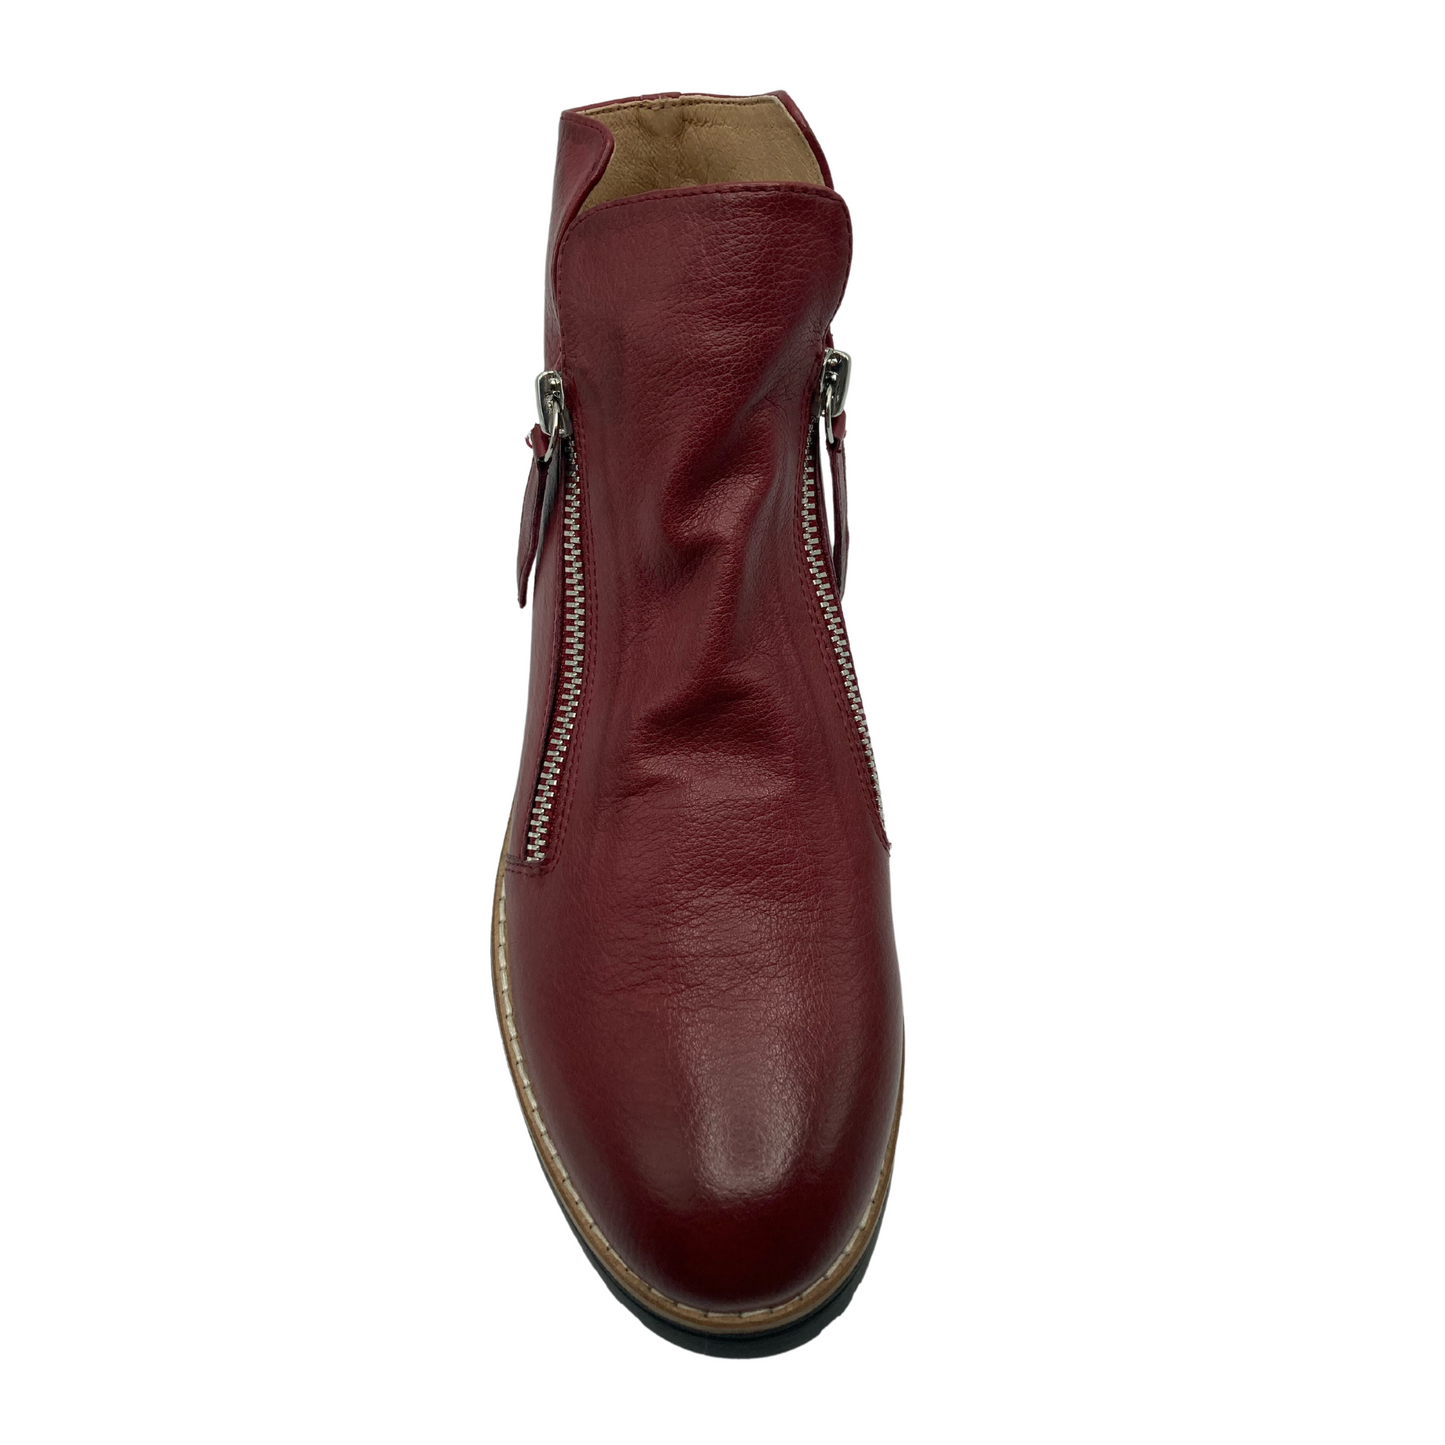 Top view of red leather boot with rounded toe and a zipper on either side of the ankle